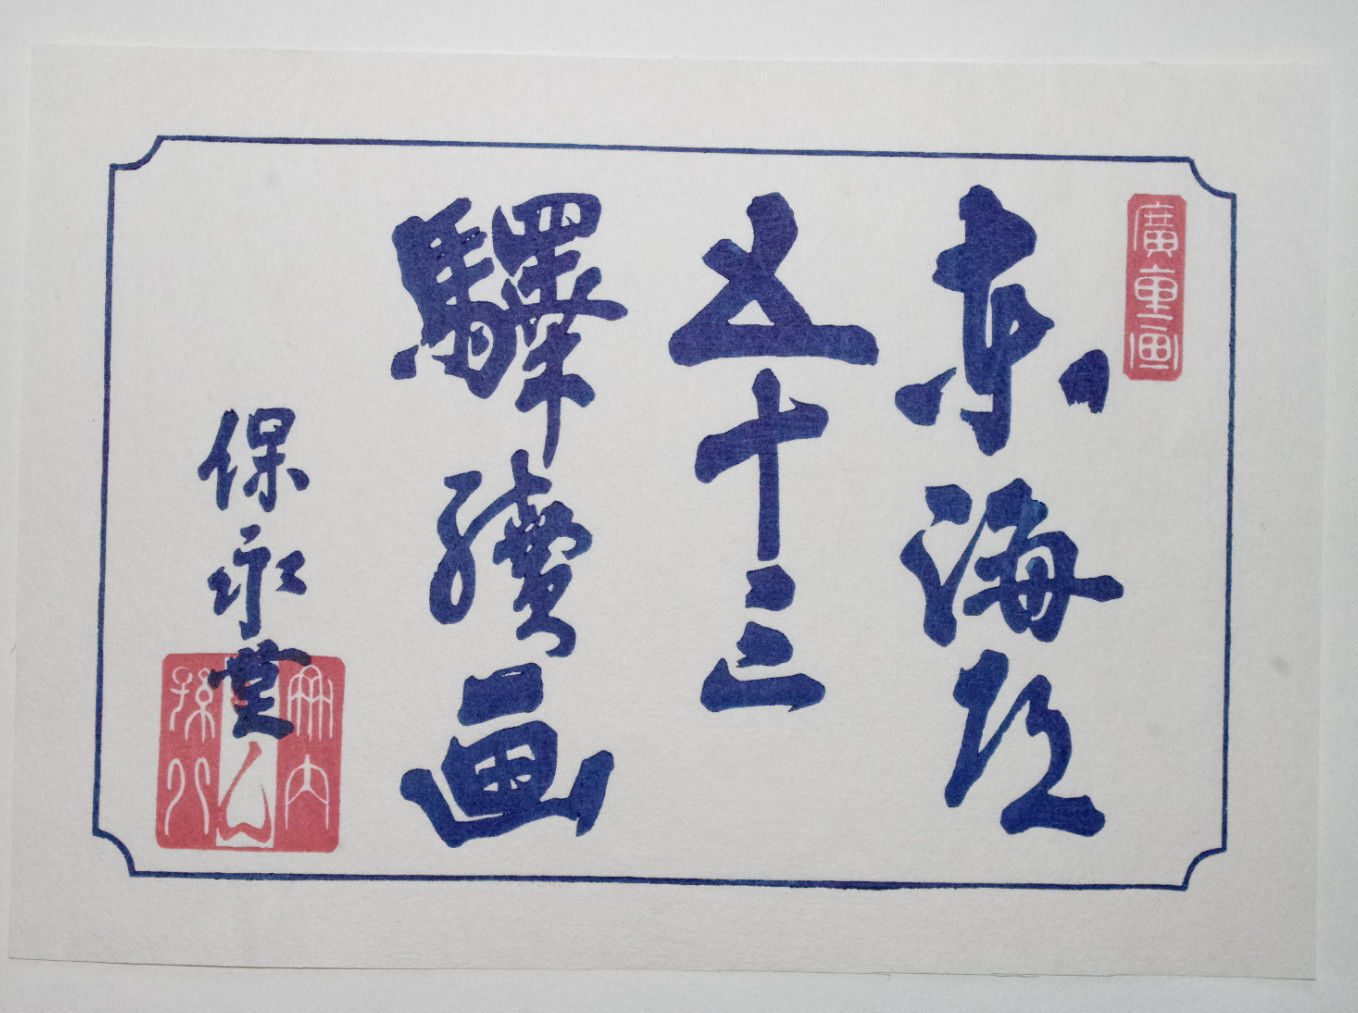 ANDO HIROSHIGE: 53 Genuine STATIONS OF THE TOKAIDO - WOODBLOCK TITLE PAGE REAL El Paso Mall PRINT